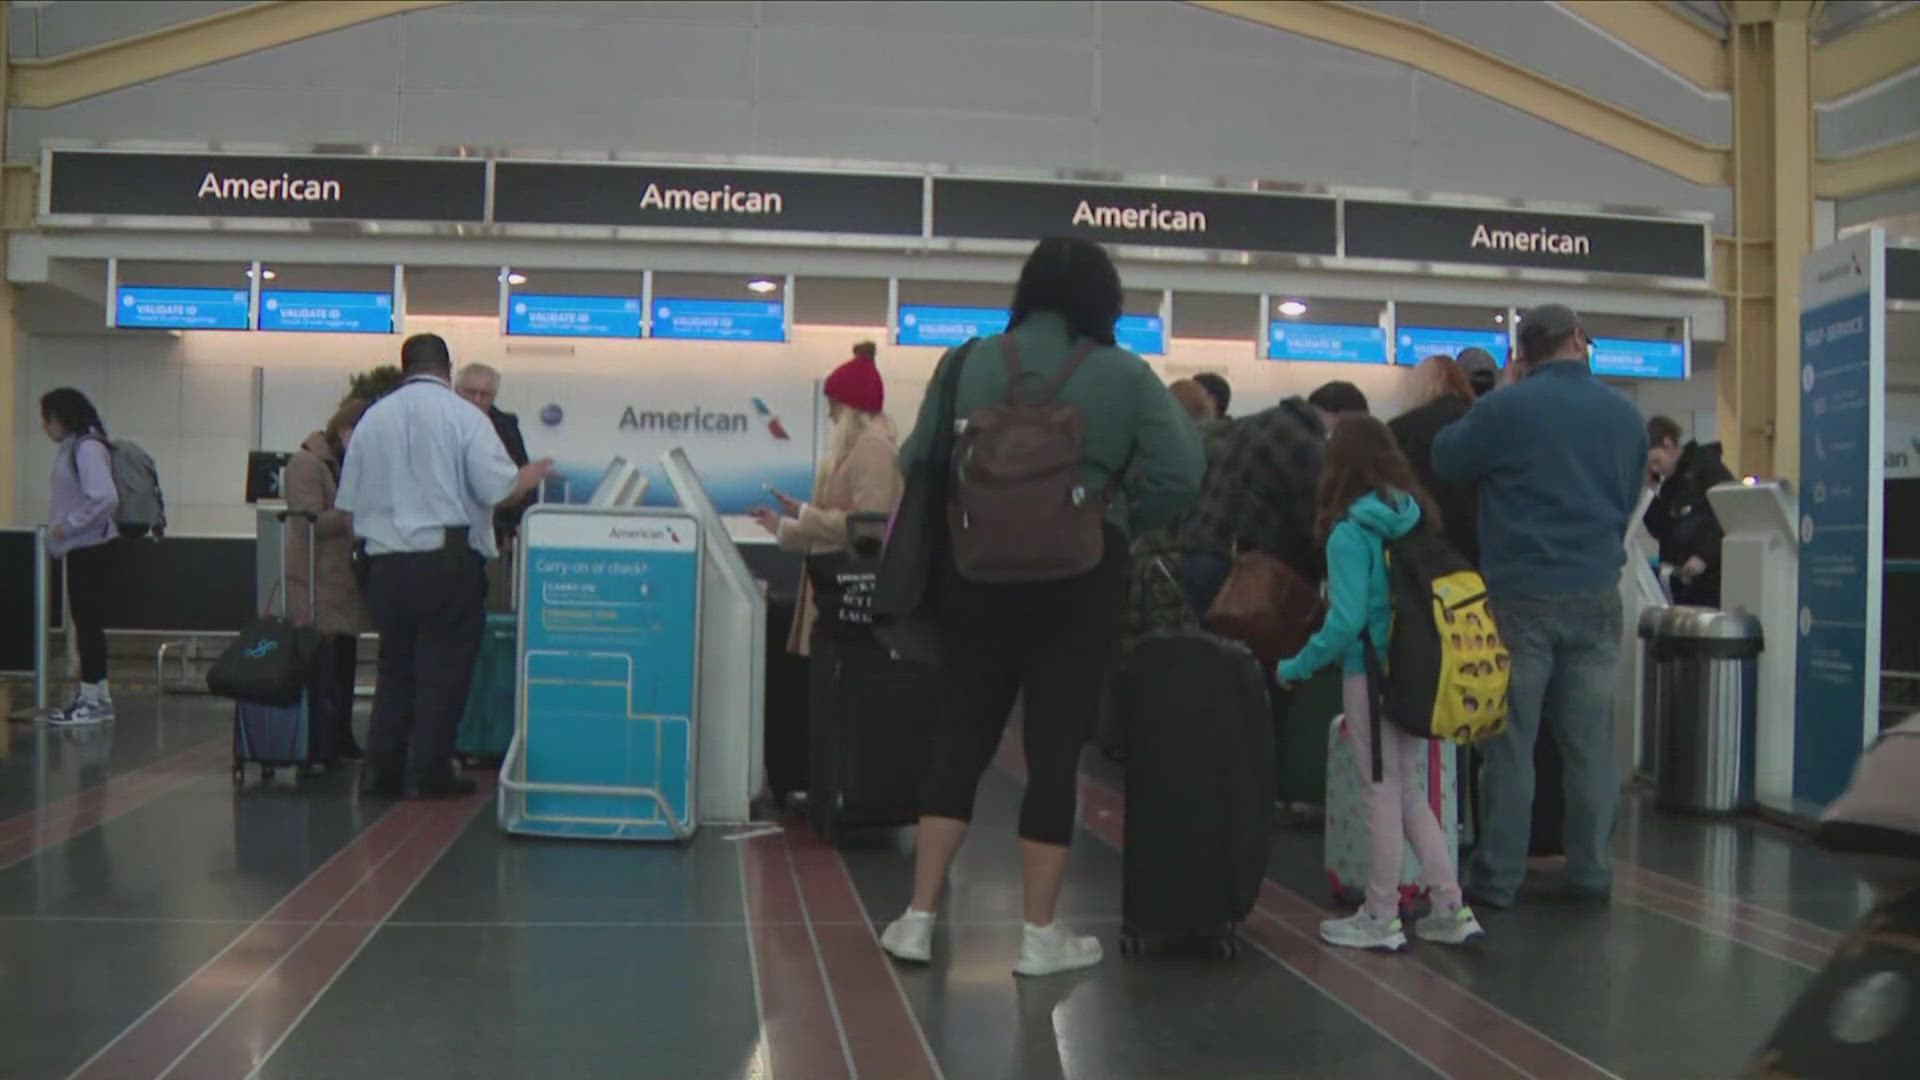 A new study found that travelers walk 1.62 miles from check-in to gates.